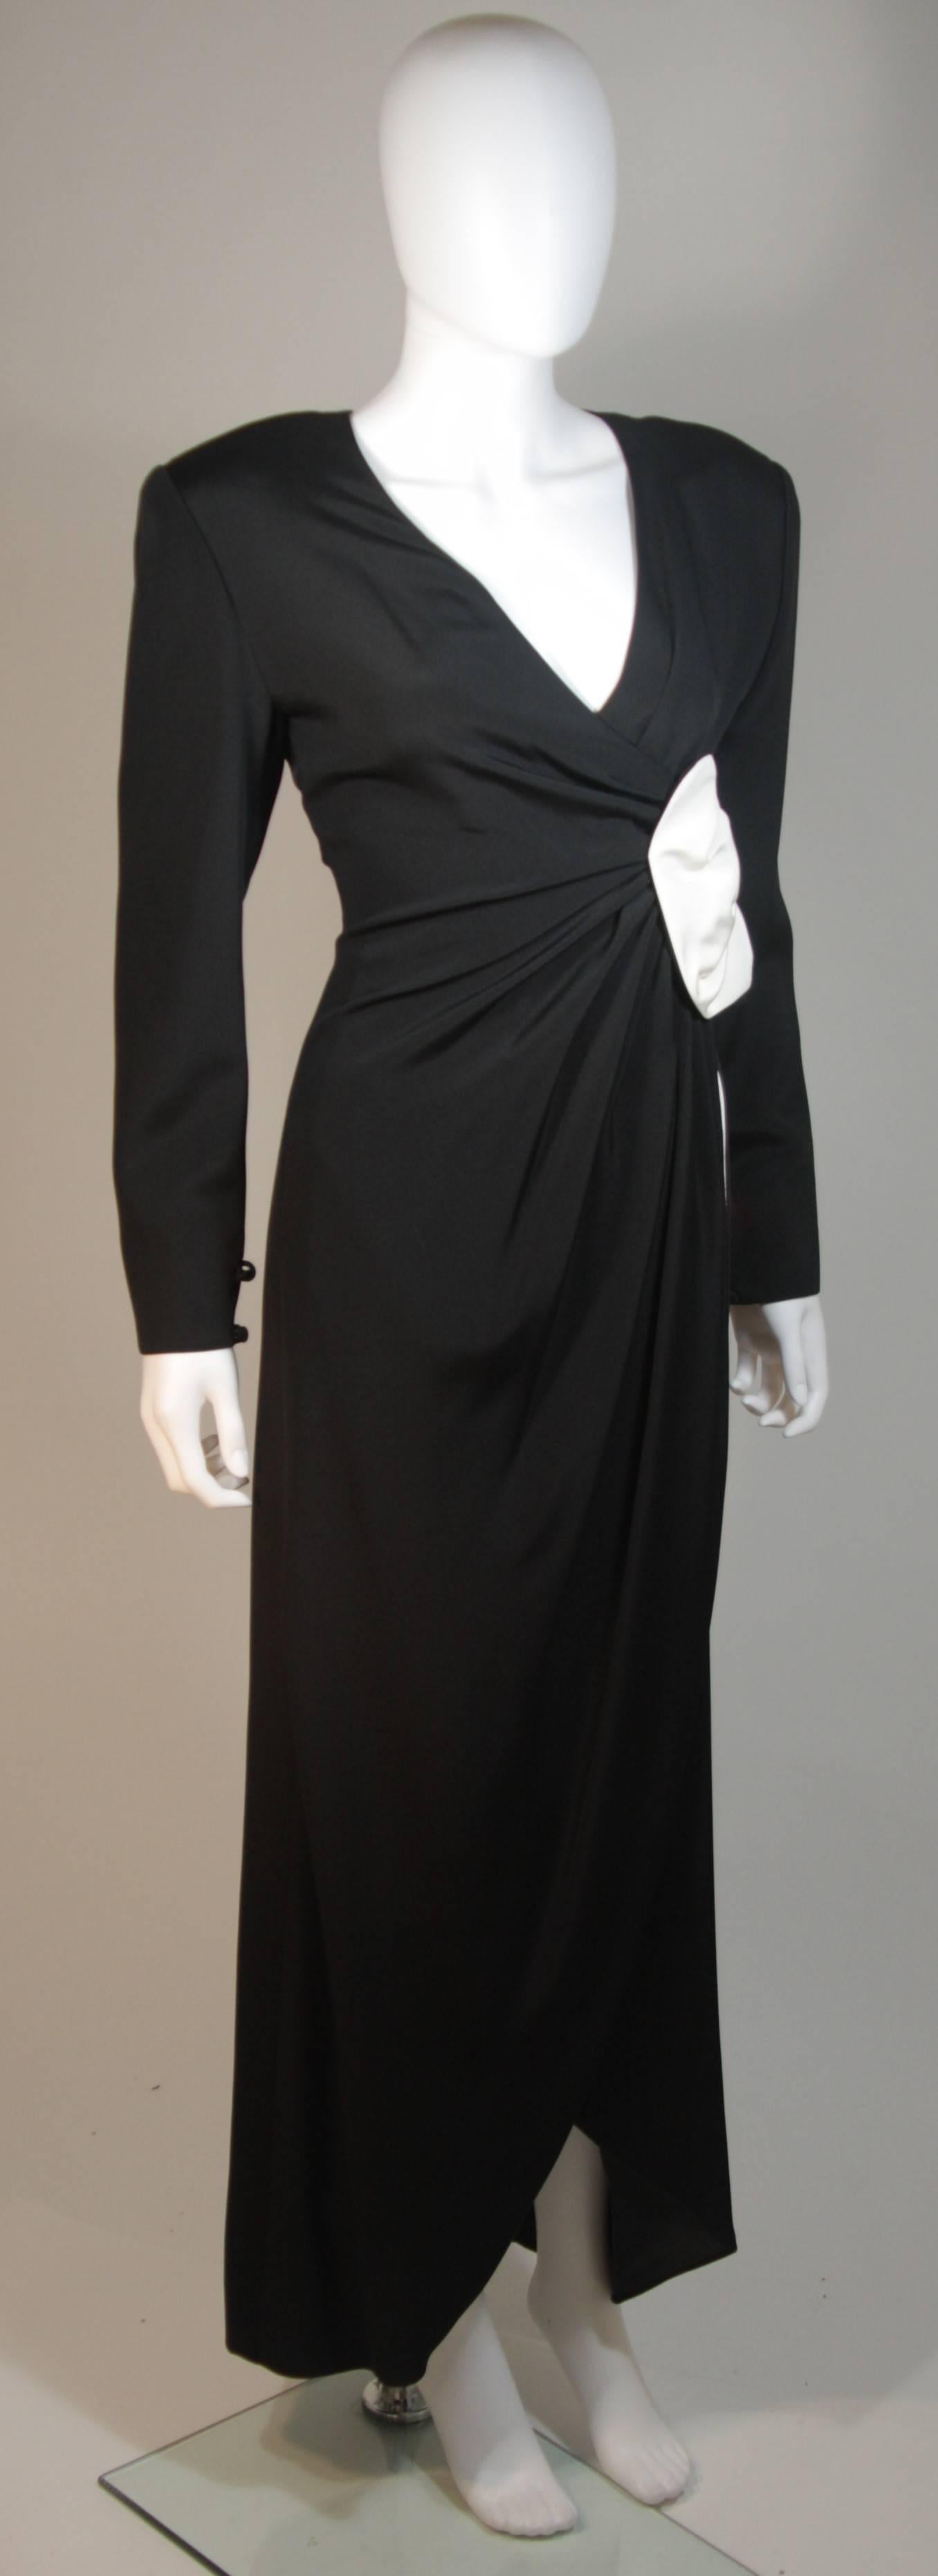 NOLAN MILLER Black and White Contrast Gown with Drape Detail Size 6 In Excellent Condition For Sale In Los Angeles, CA